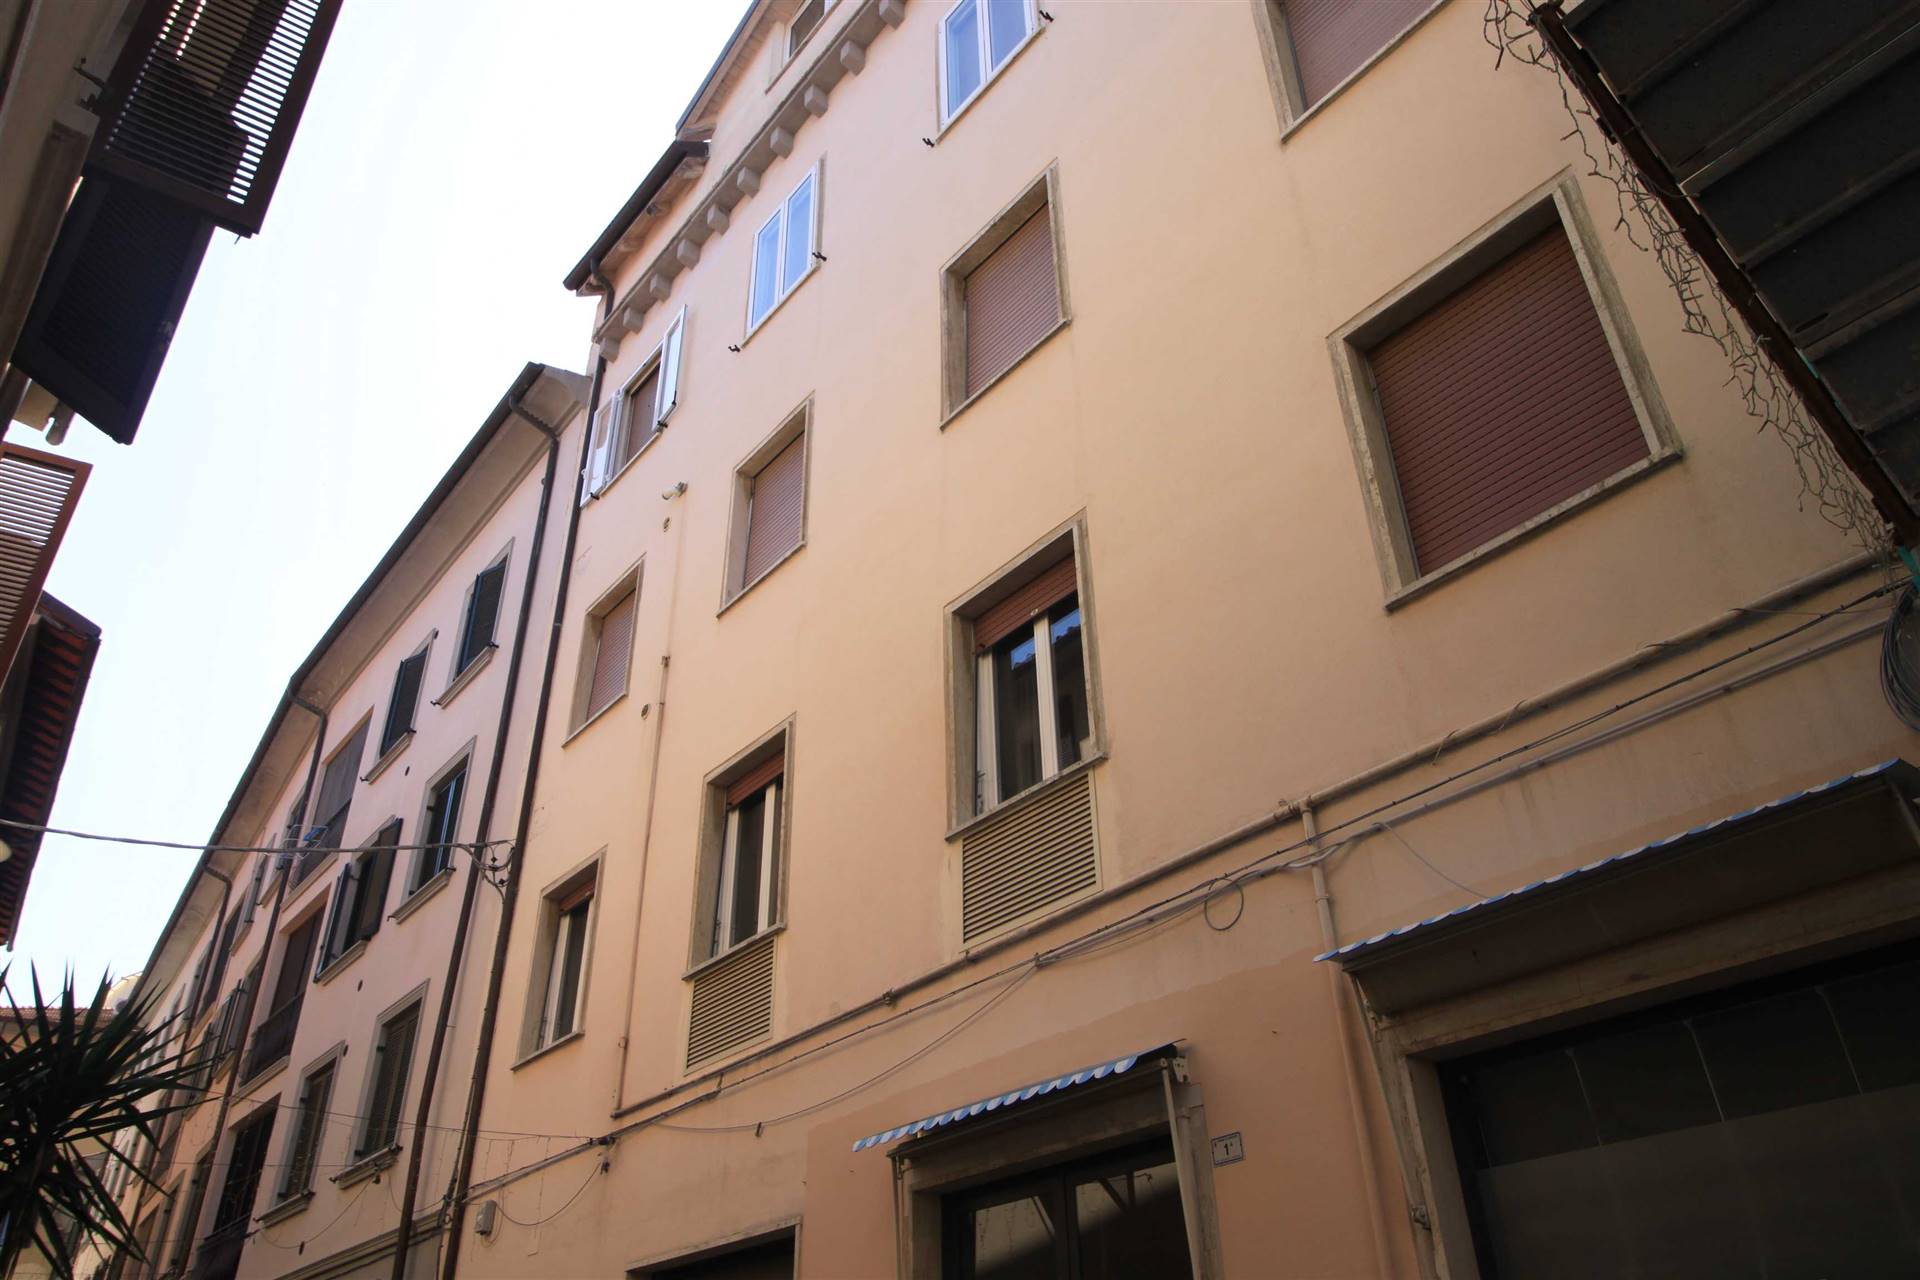 CENTRO STORICO, GROSSETO, Apartment for sale of 90 Sq. mt., Restored, Heating Individual heating system, Energetic class: G, Epi: 231,4 kwh/m2 year, 